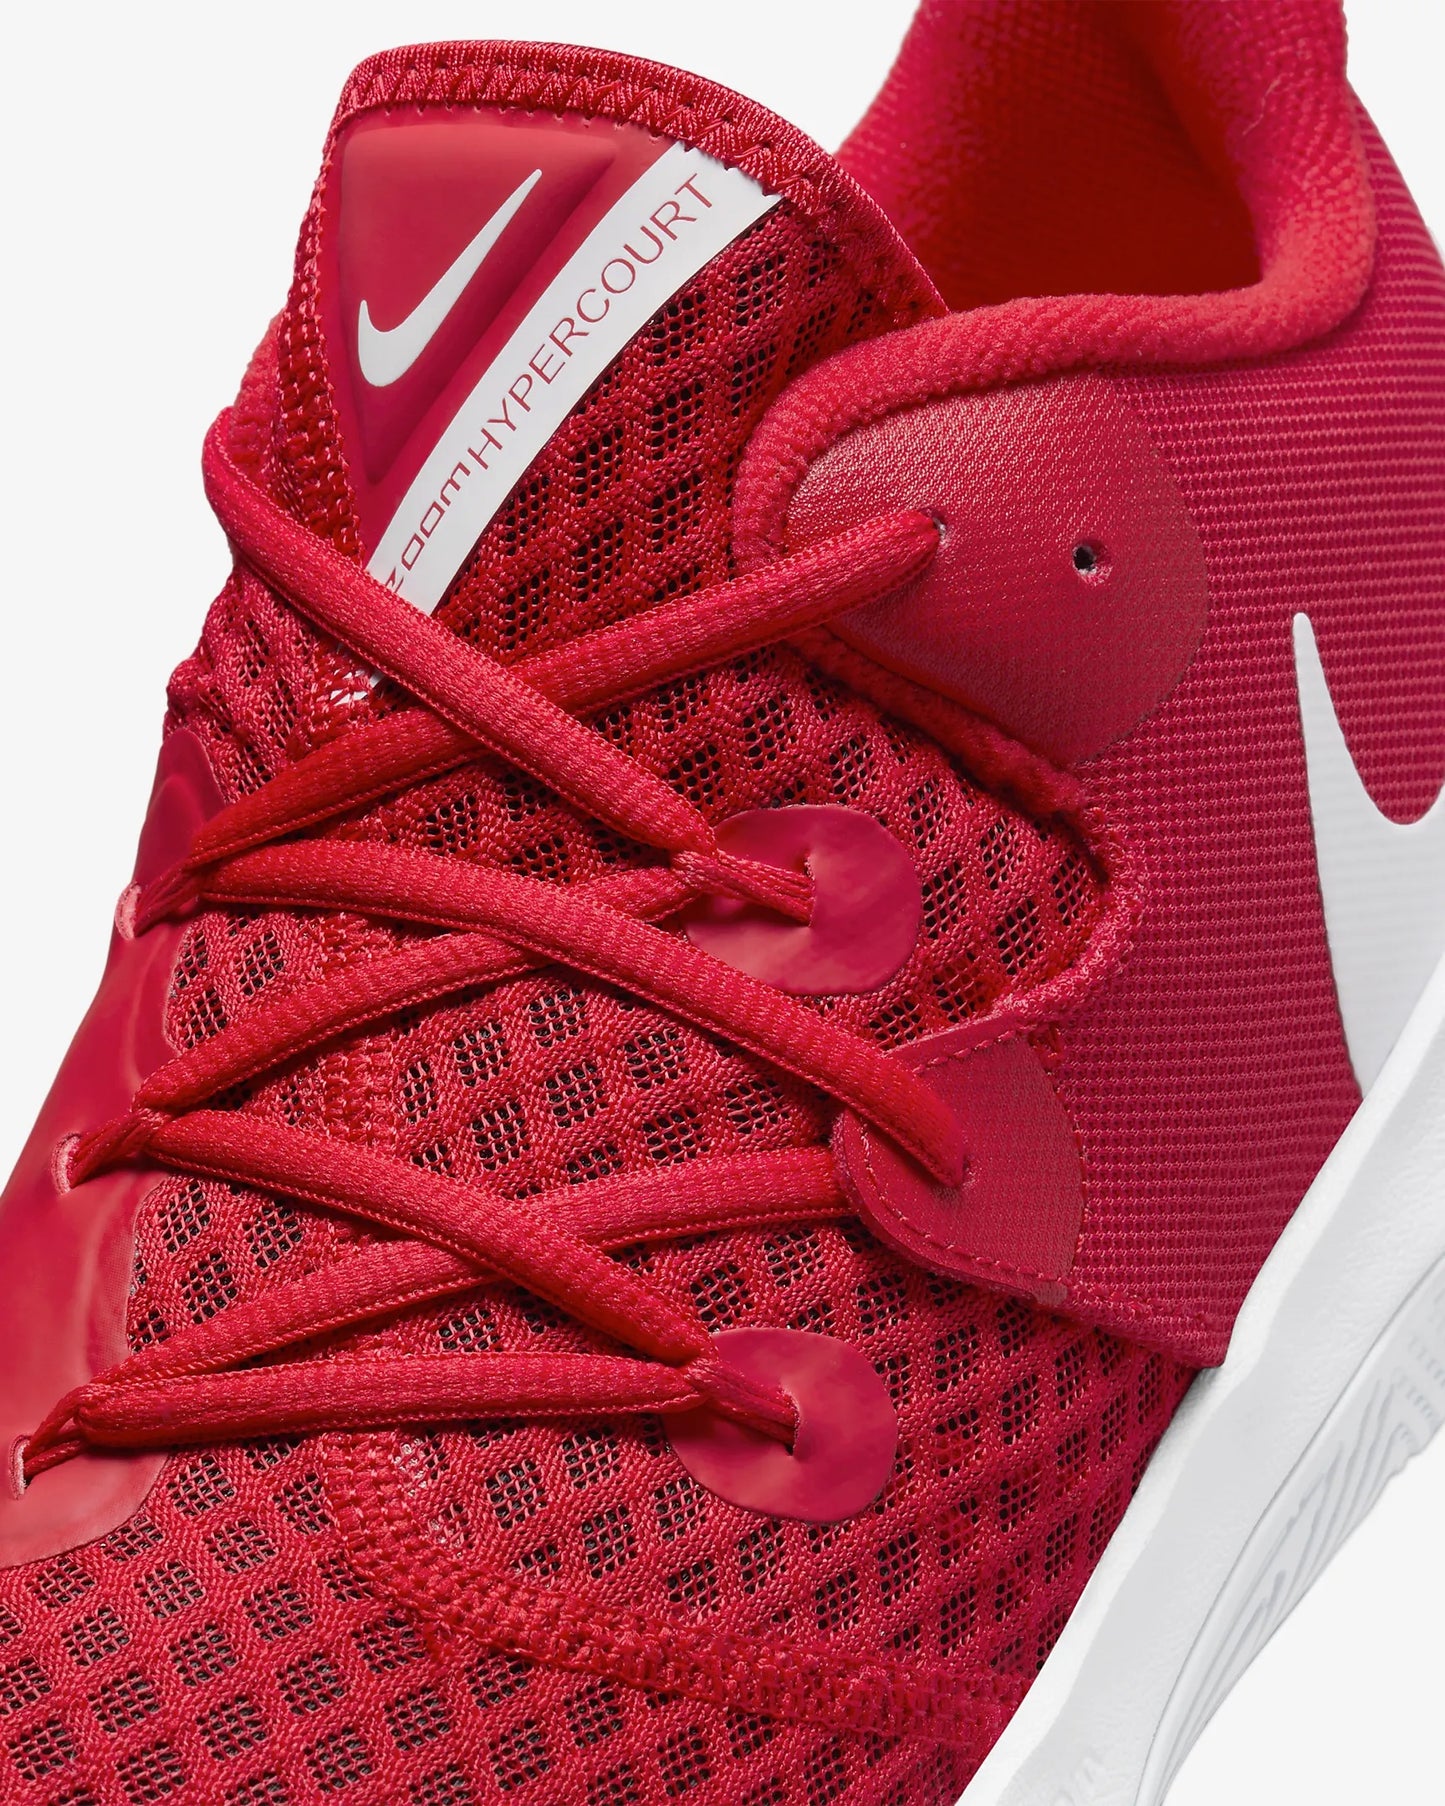 Nike Zoom Hyperspeed Court Shoes(Red)